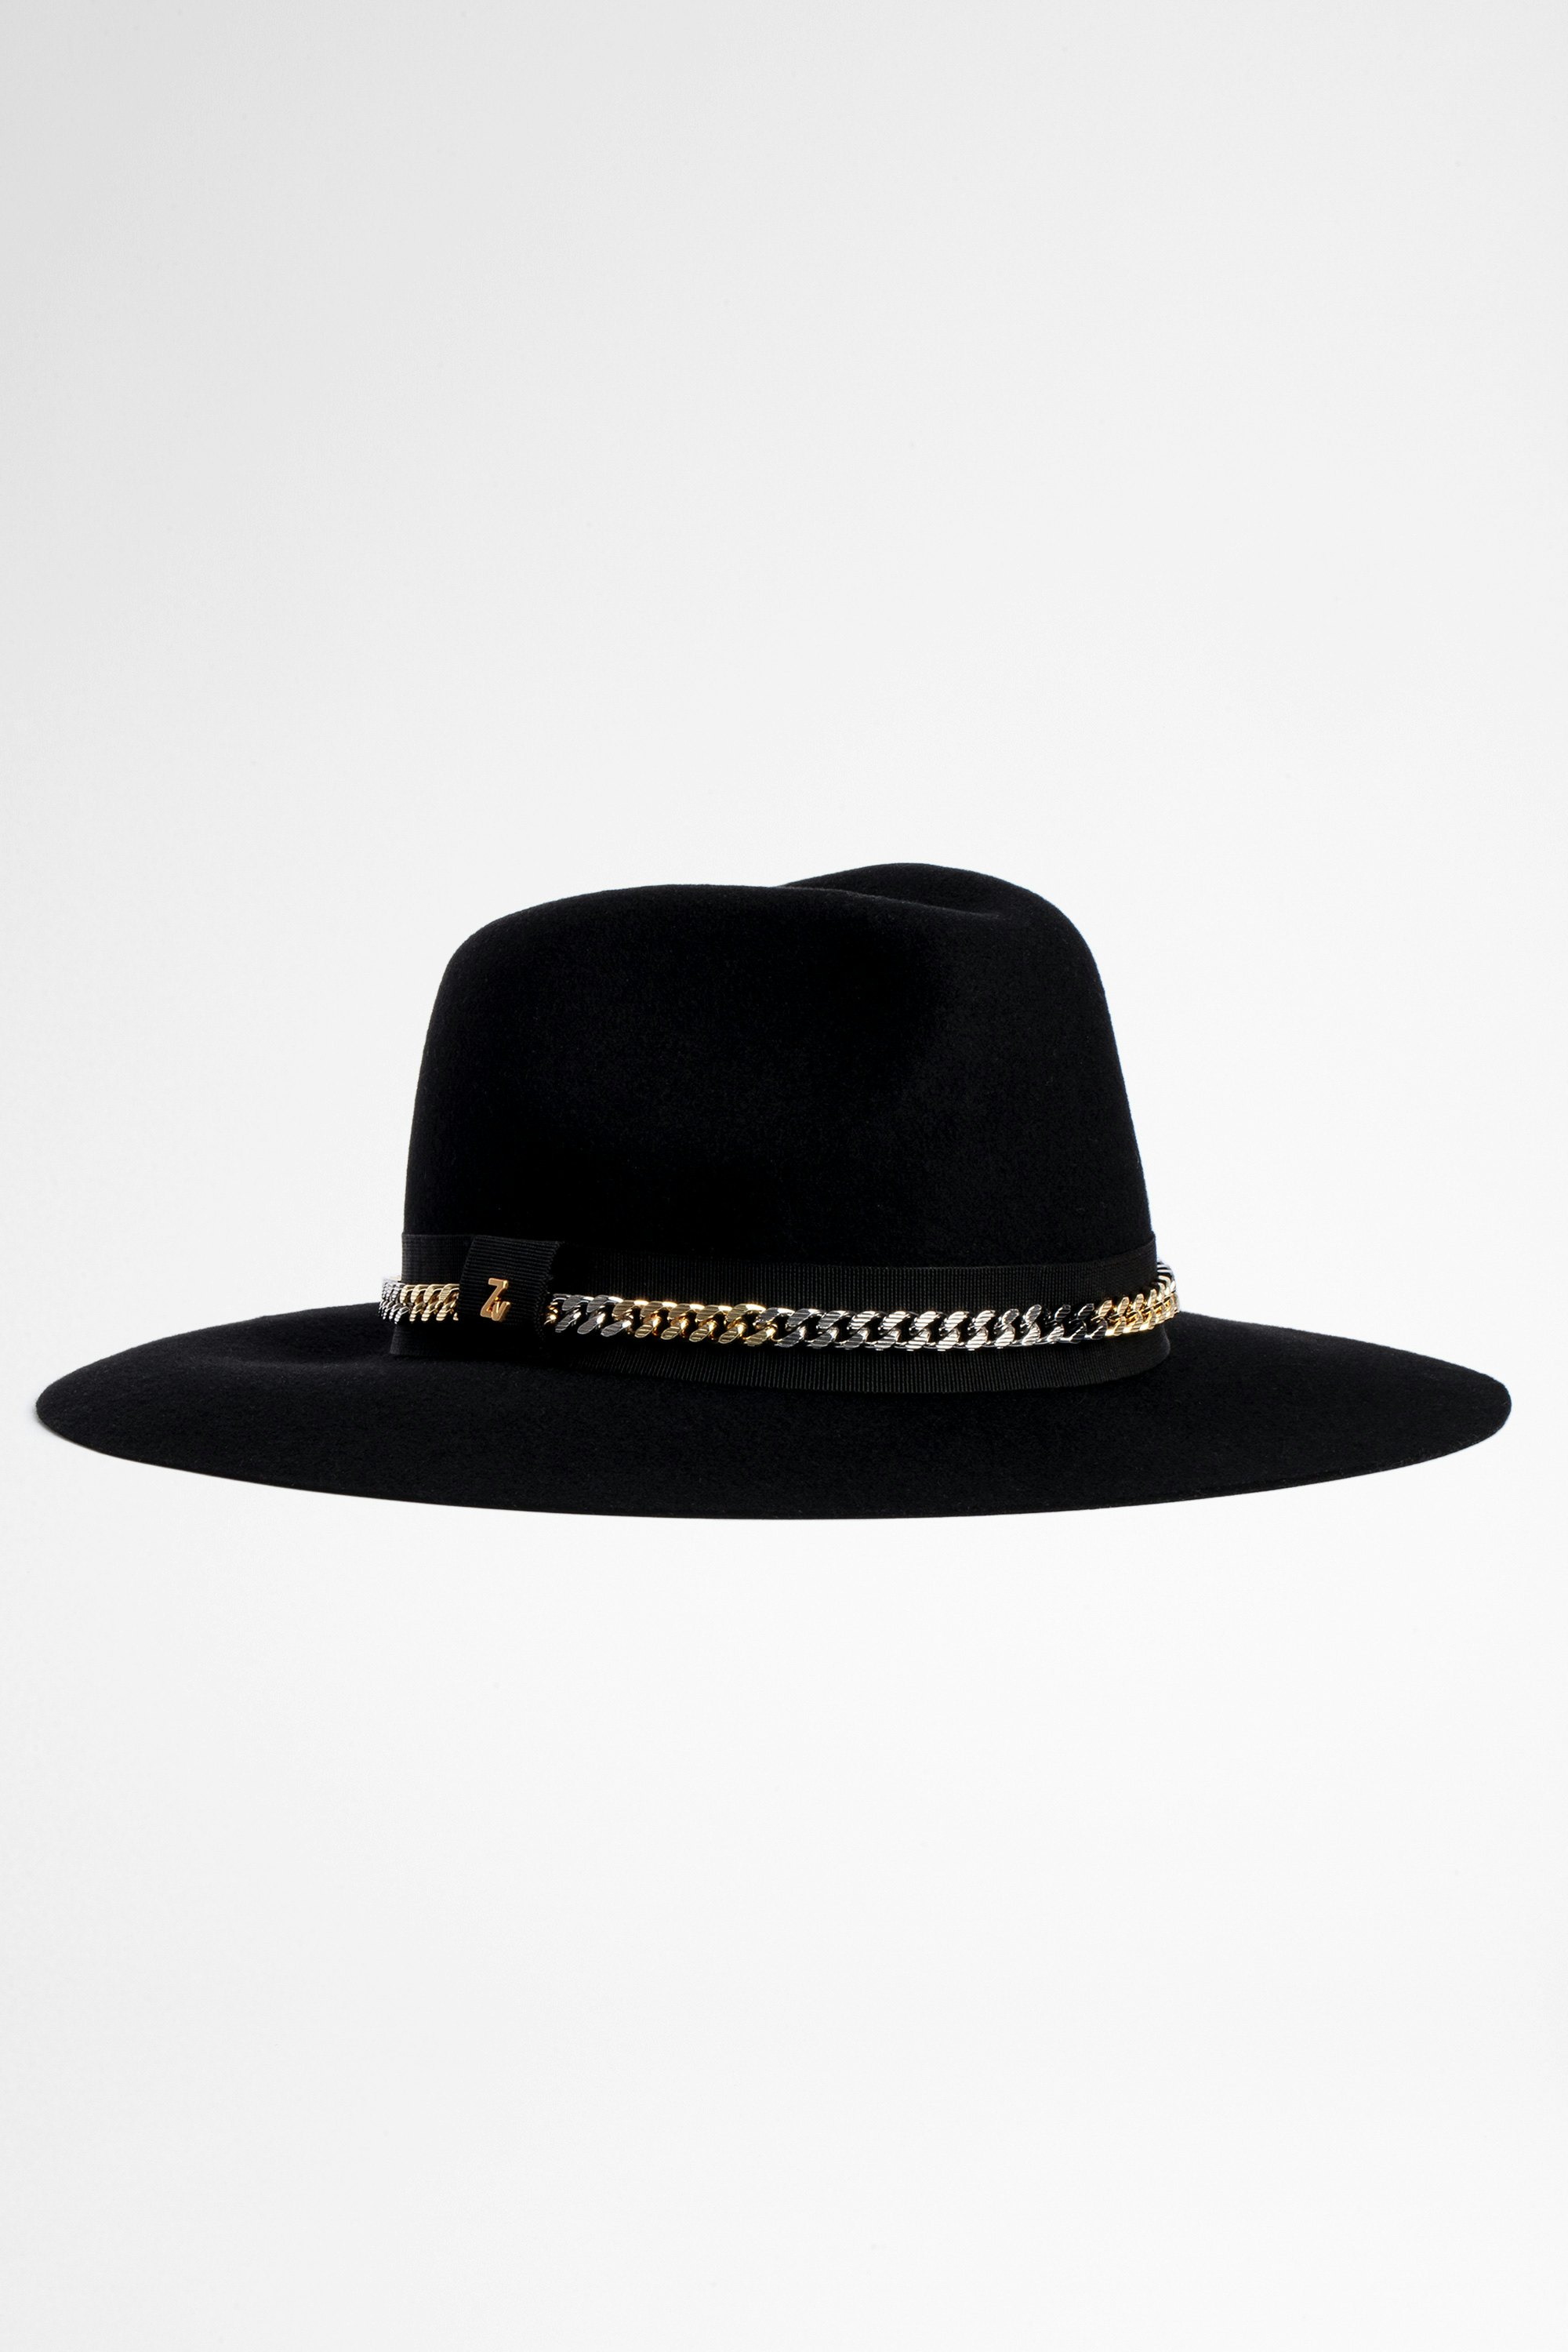 Amelia Chain Hat Women’s black wool hat with gold chain